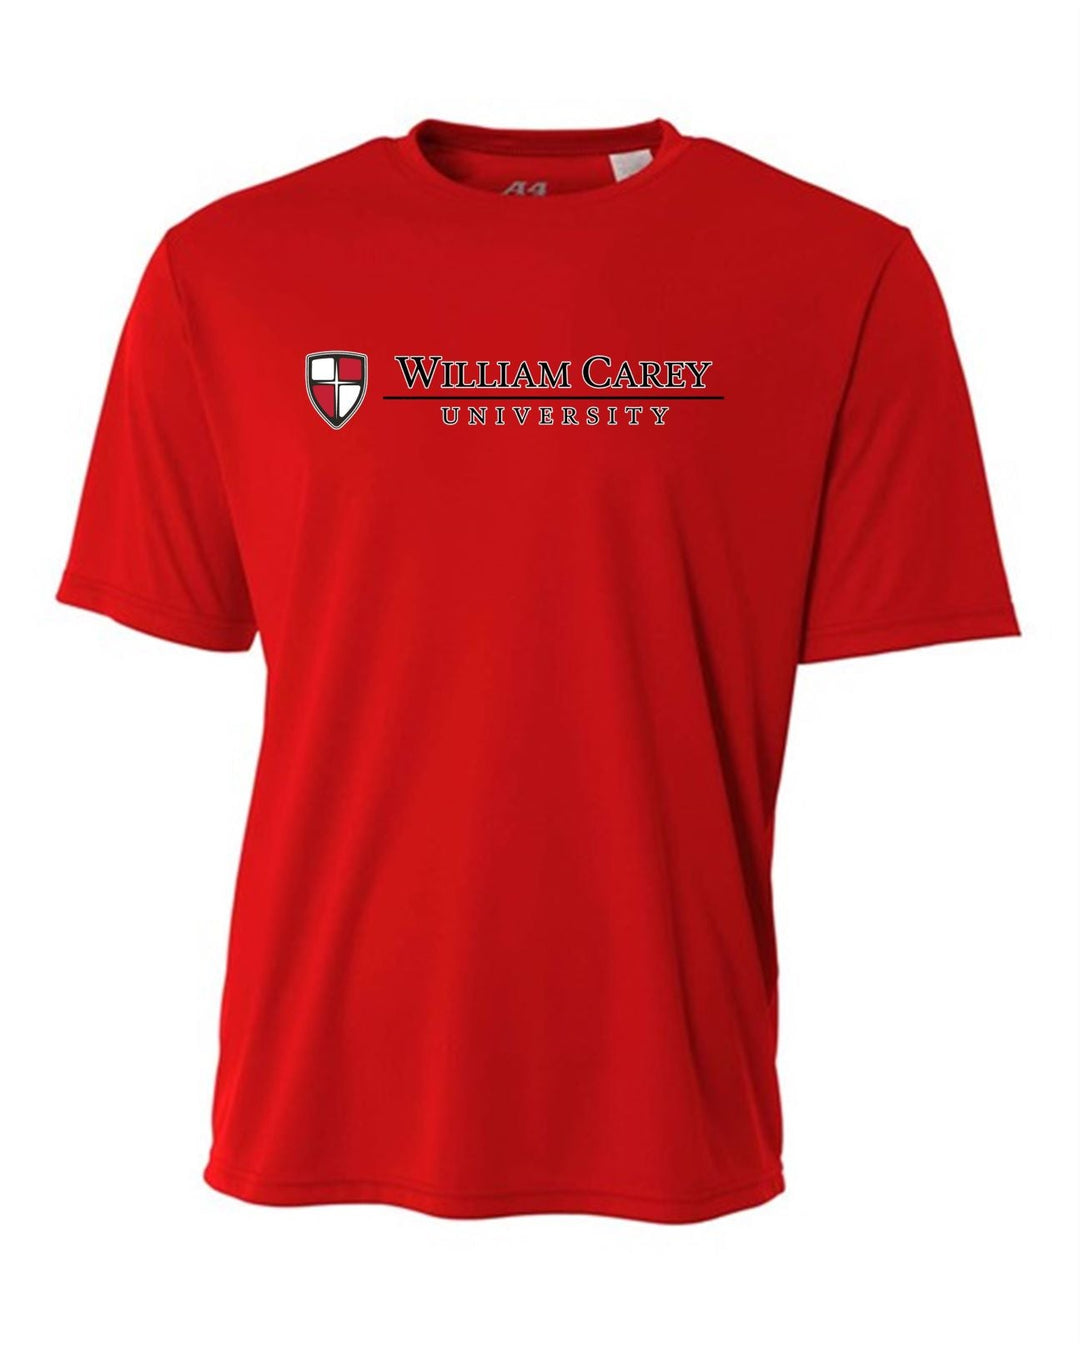 WCU Tradition Campus Youth Short-Sleeve Performance Shirt WCU TC Red Youth Small - Third Coast Soccer